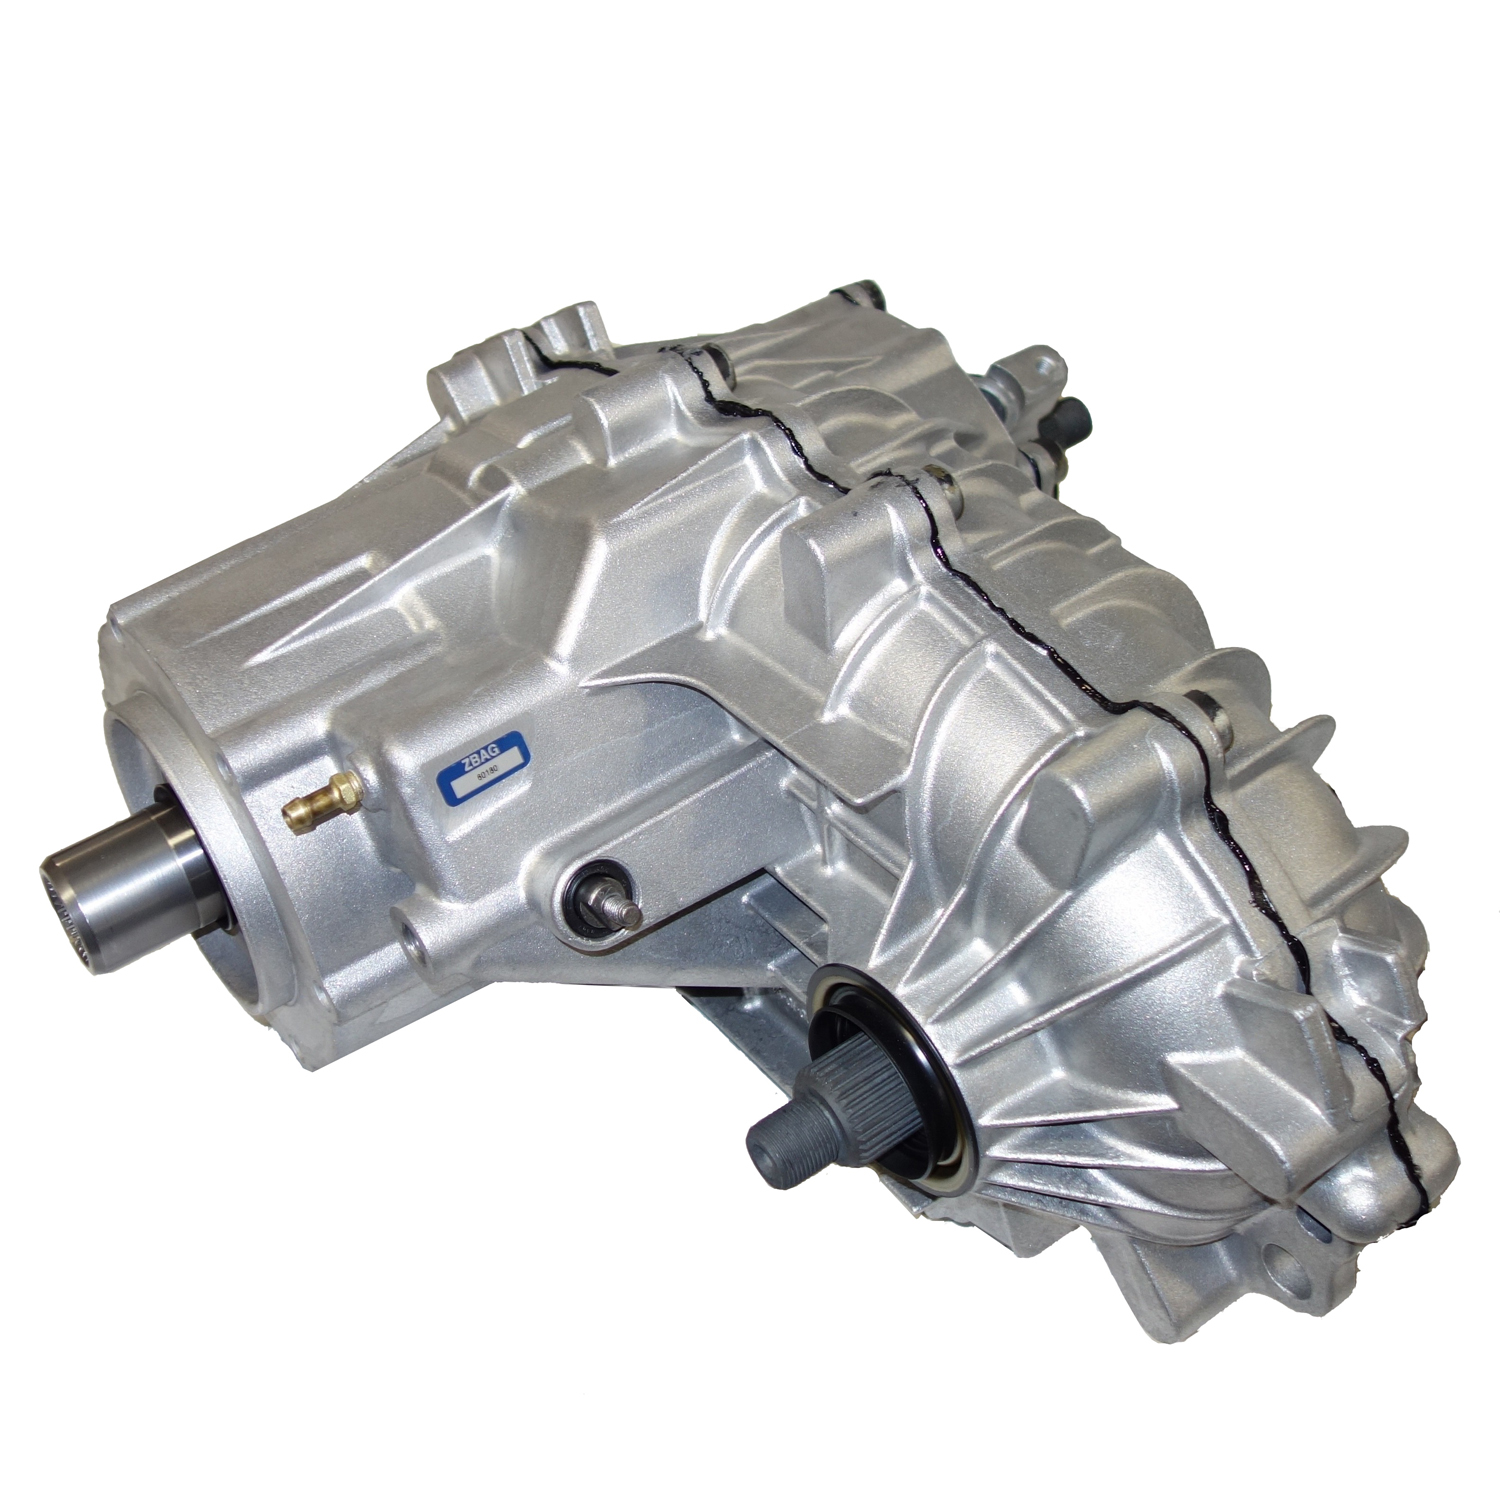 BW1370 & BW4401 Transfer Case for GM 84-00 F3500